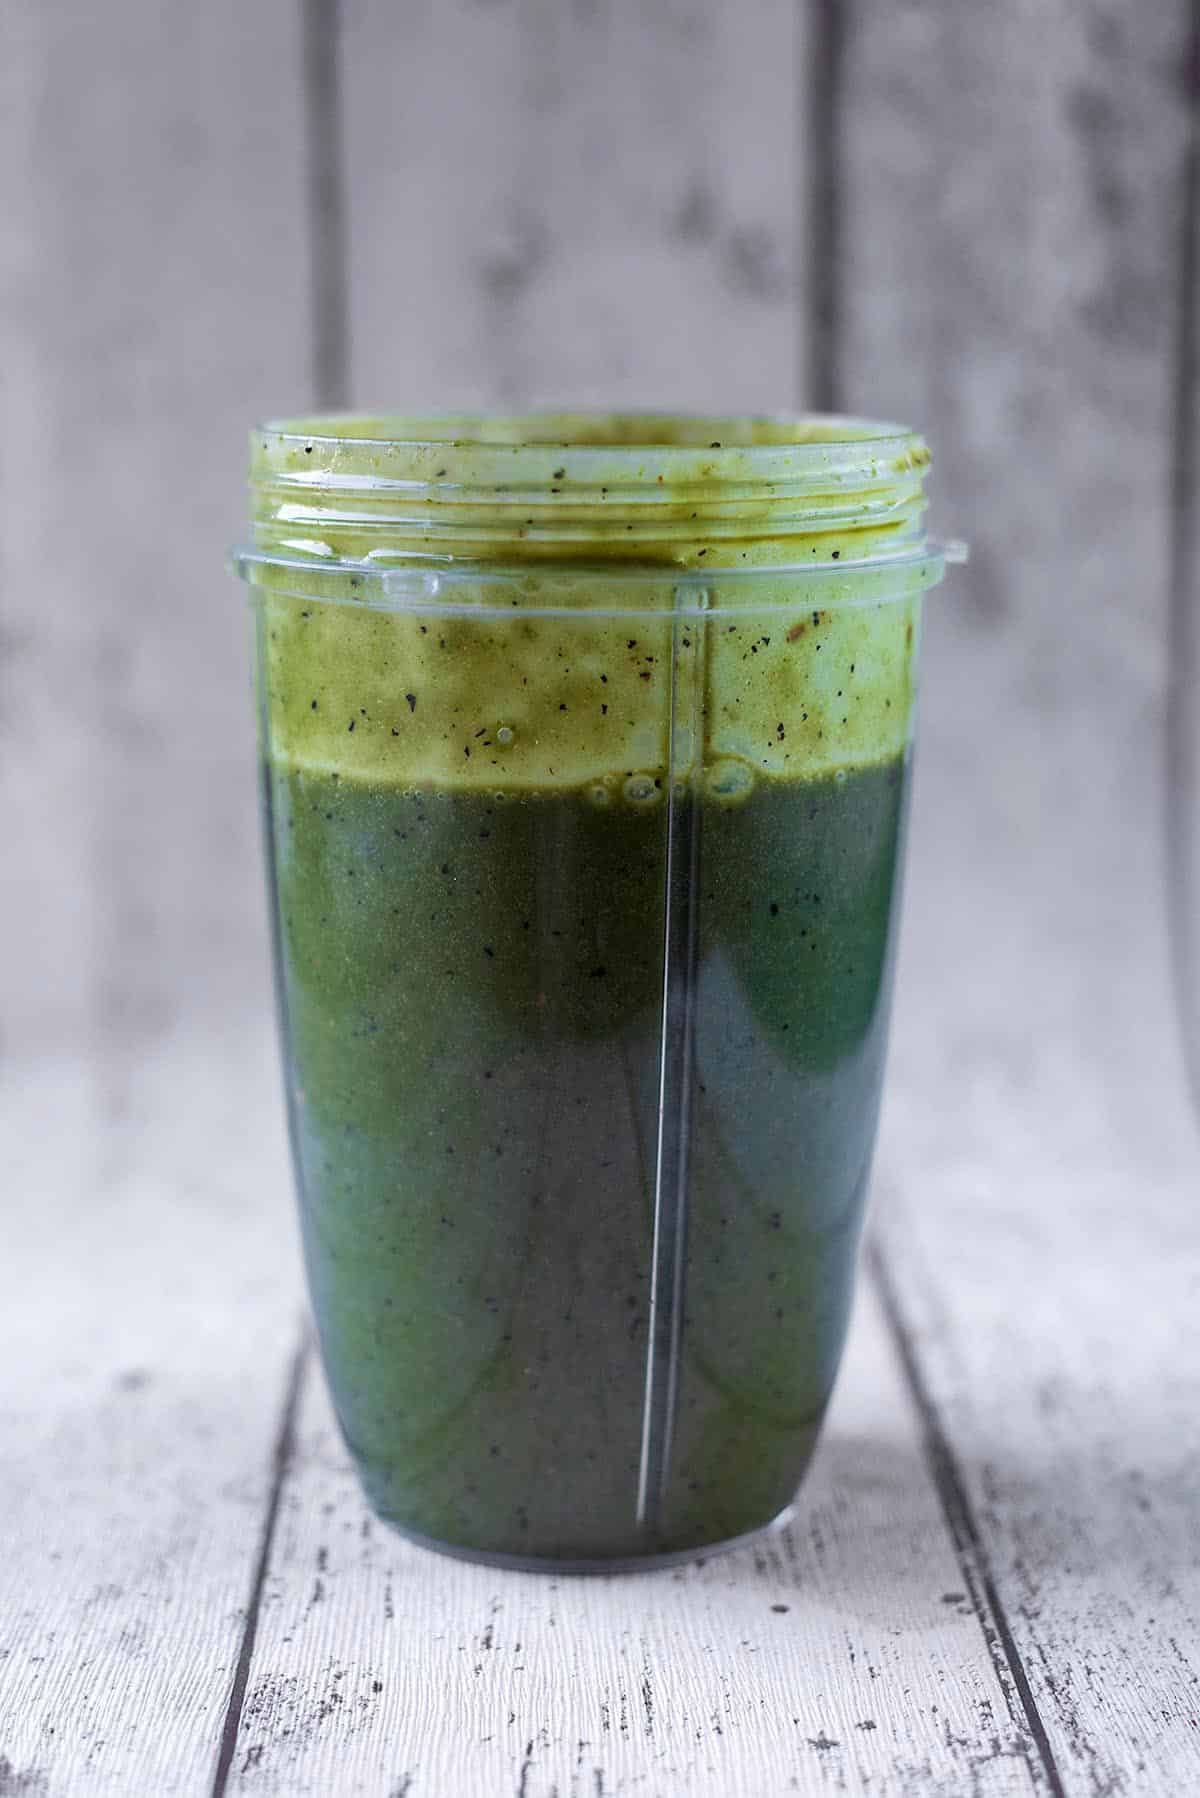 A blender jug containing a green smoothie.